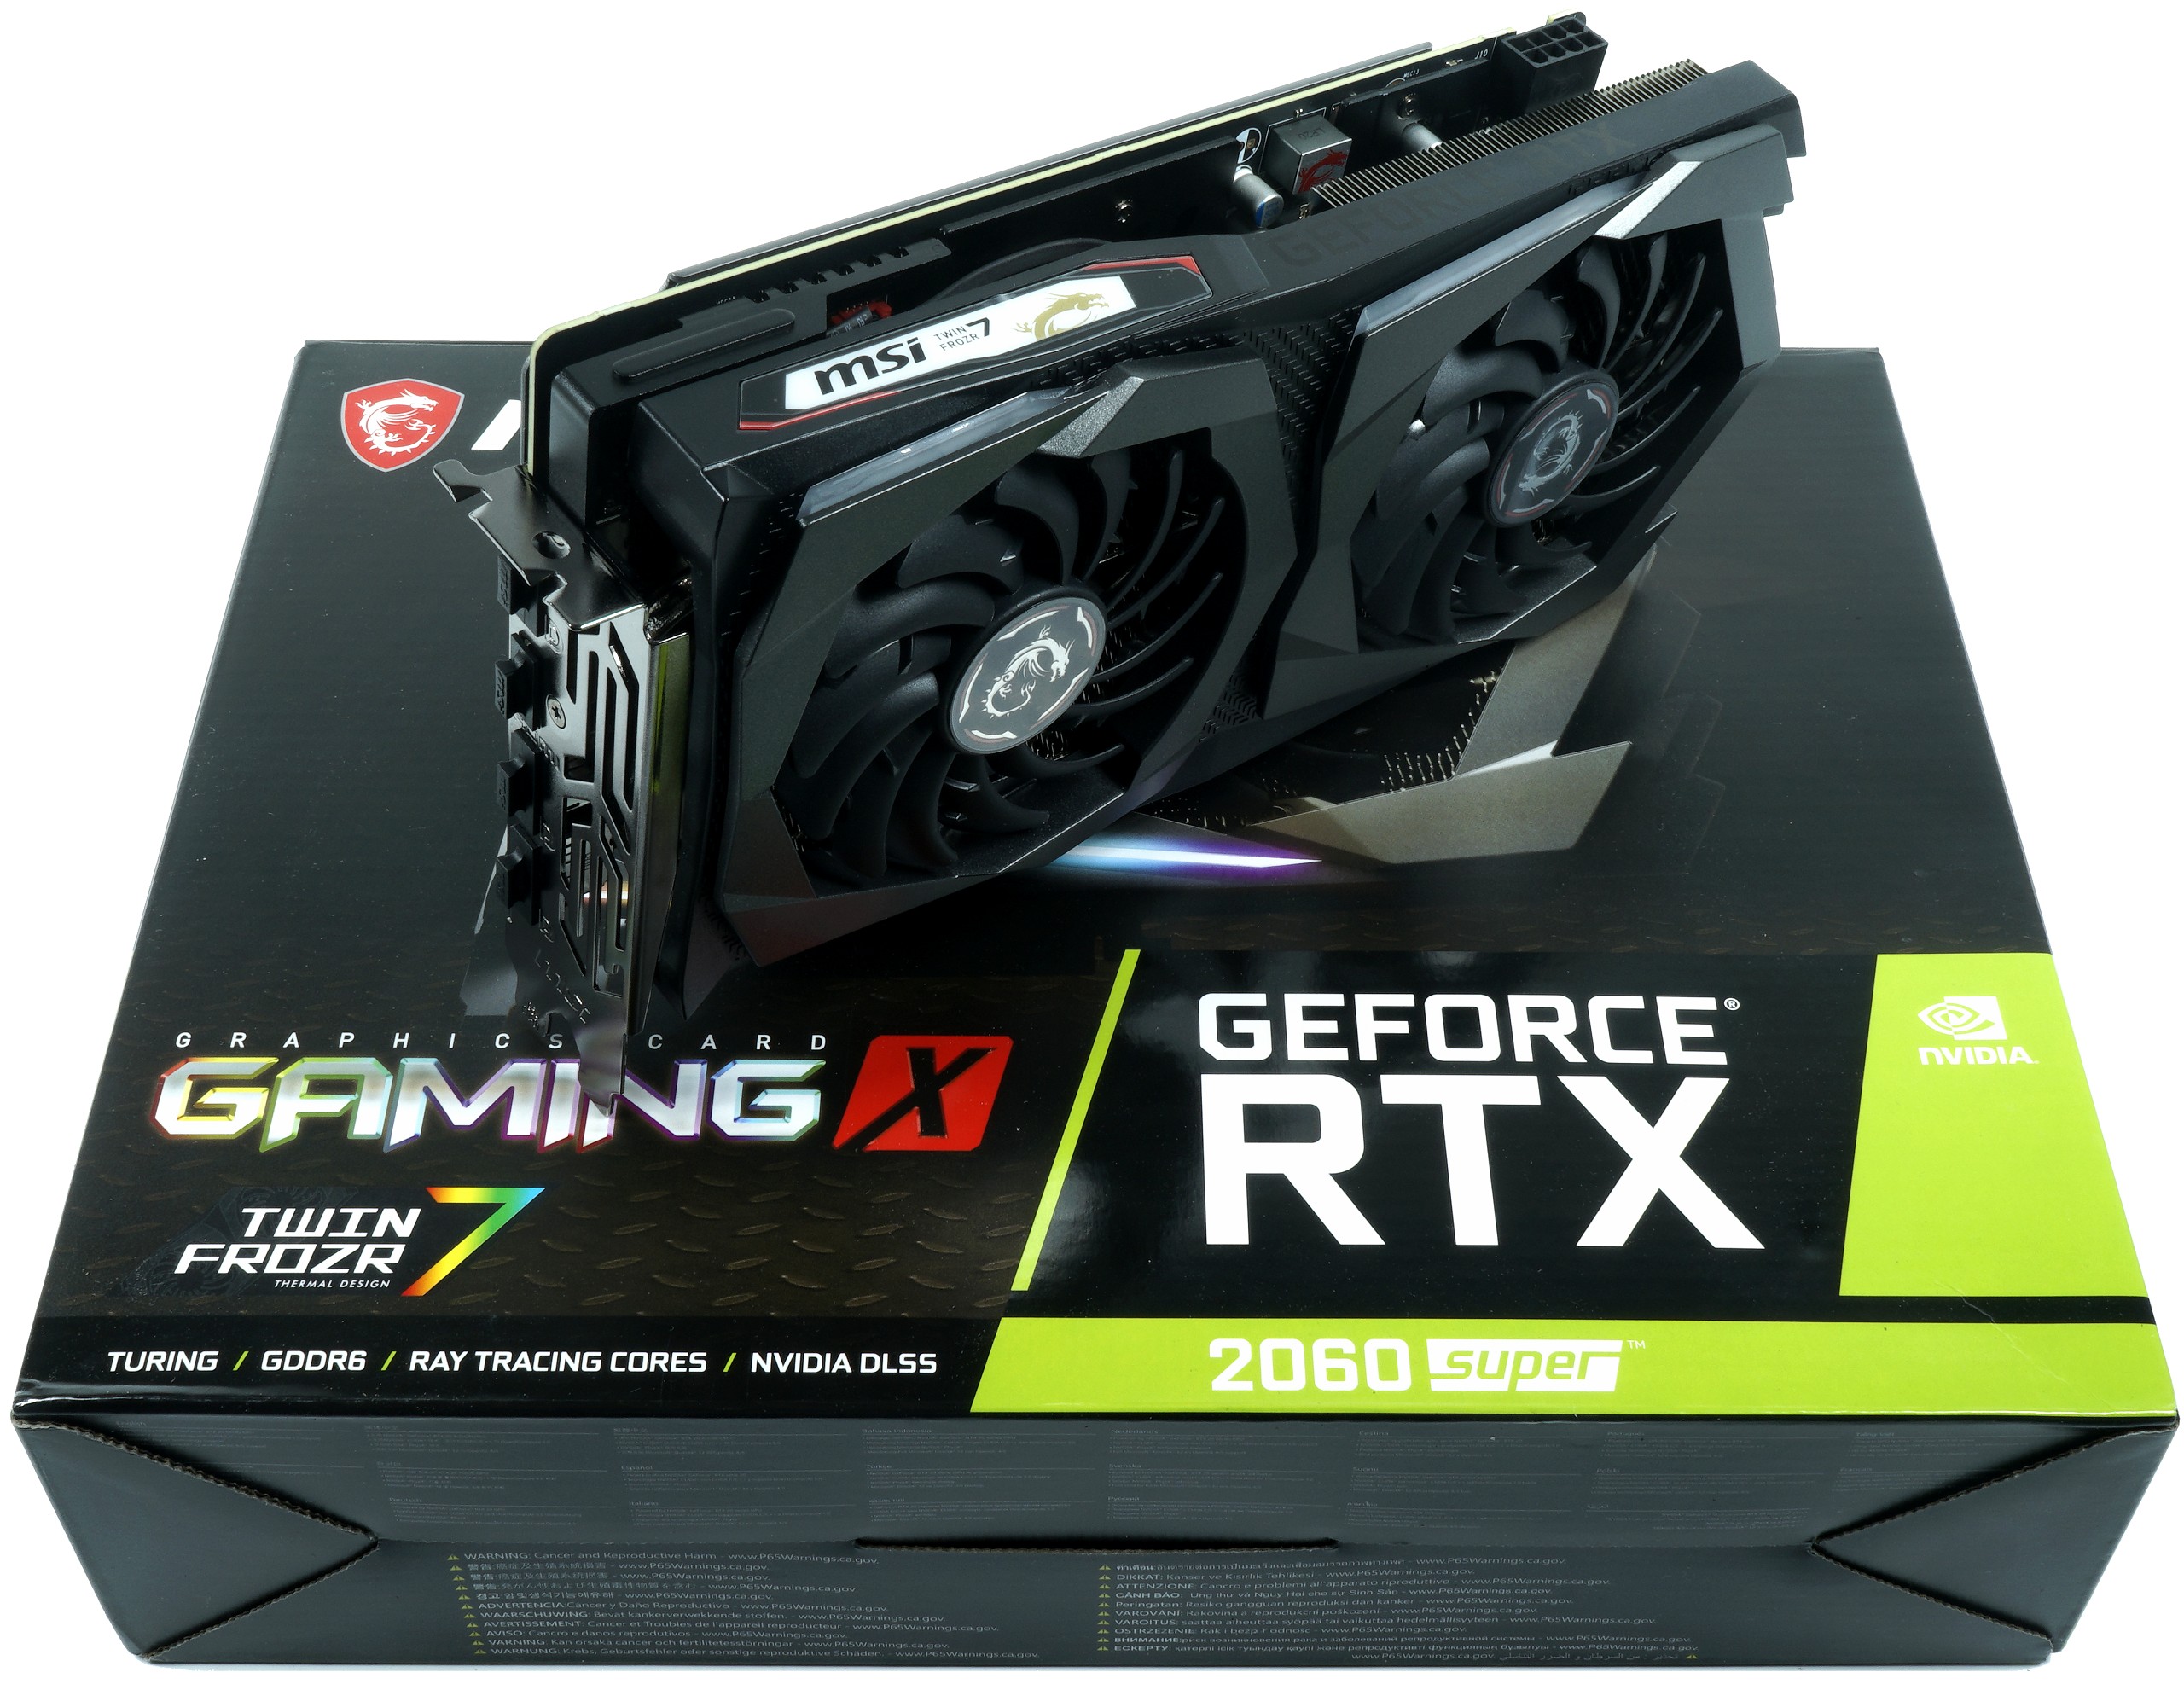 Prevented cannibal: MSI RTX 2060 Super Gaming X in review - quiet